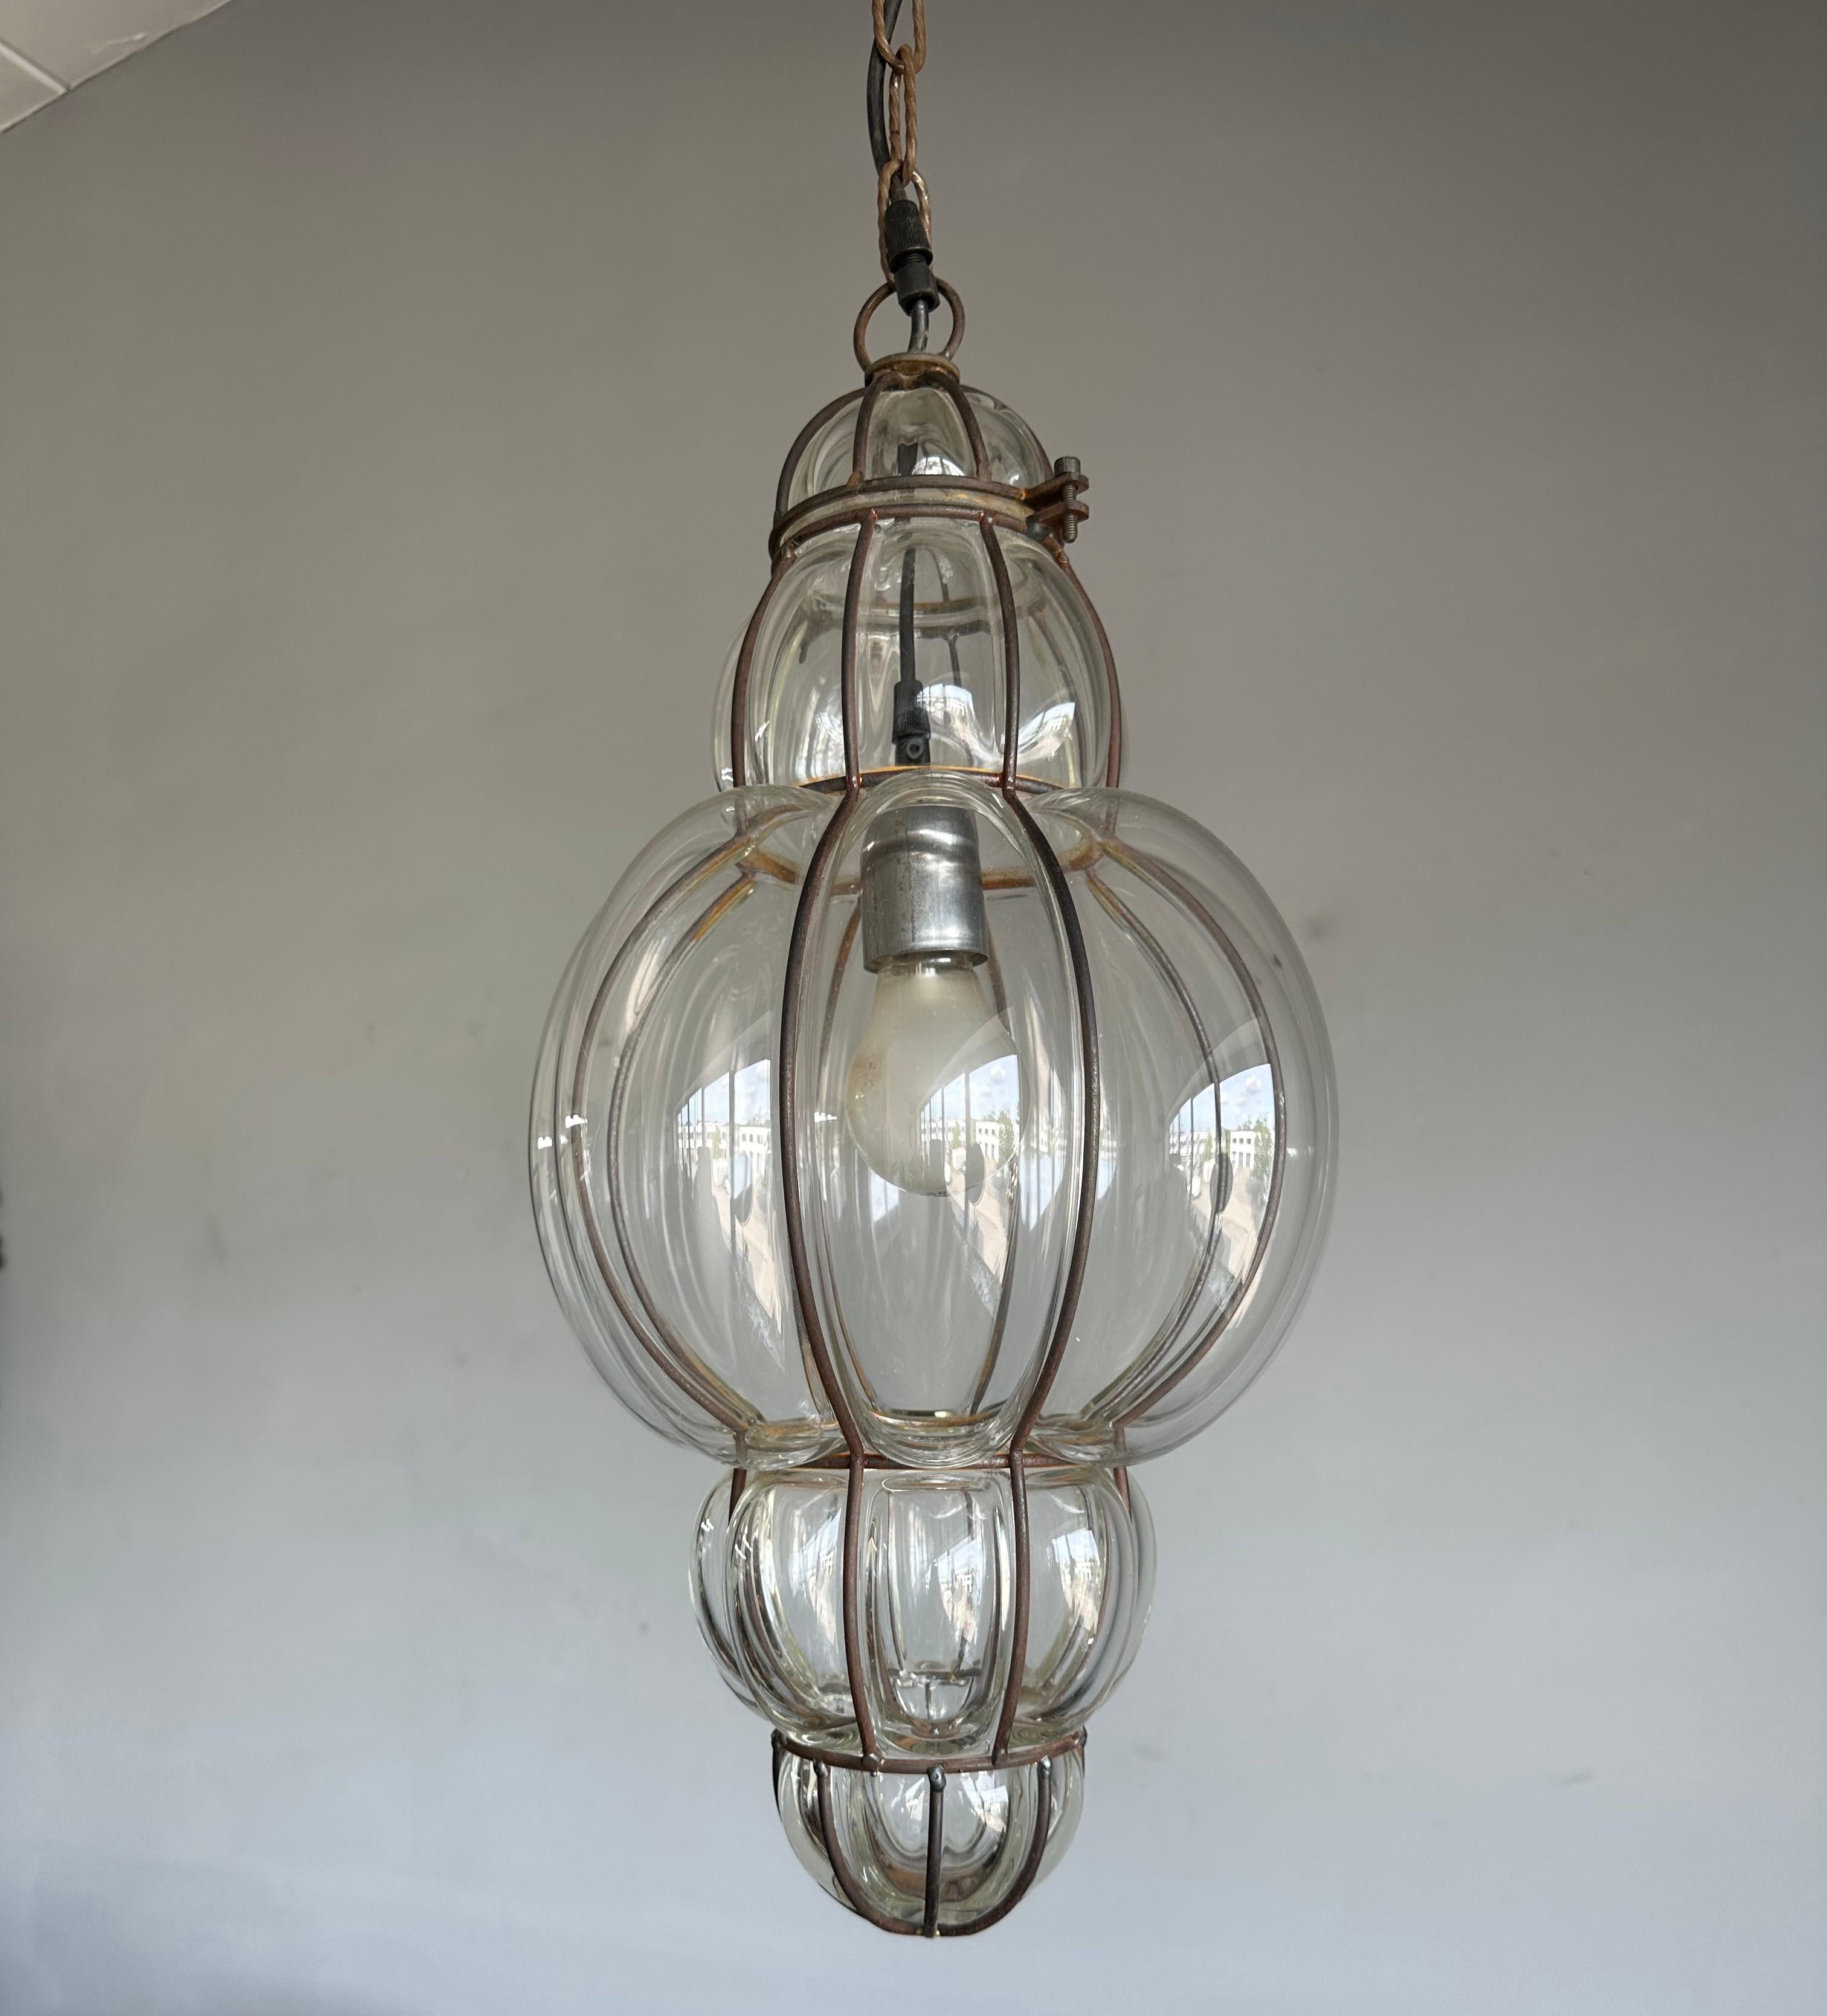 Good size, rare design, midcentury made and great condition hallway or porch light fixture.

This good size and very rare, elongated shape Venetian pendant is the only one of its kind that we ever had the pleasure of offering. The thick, transparent